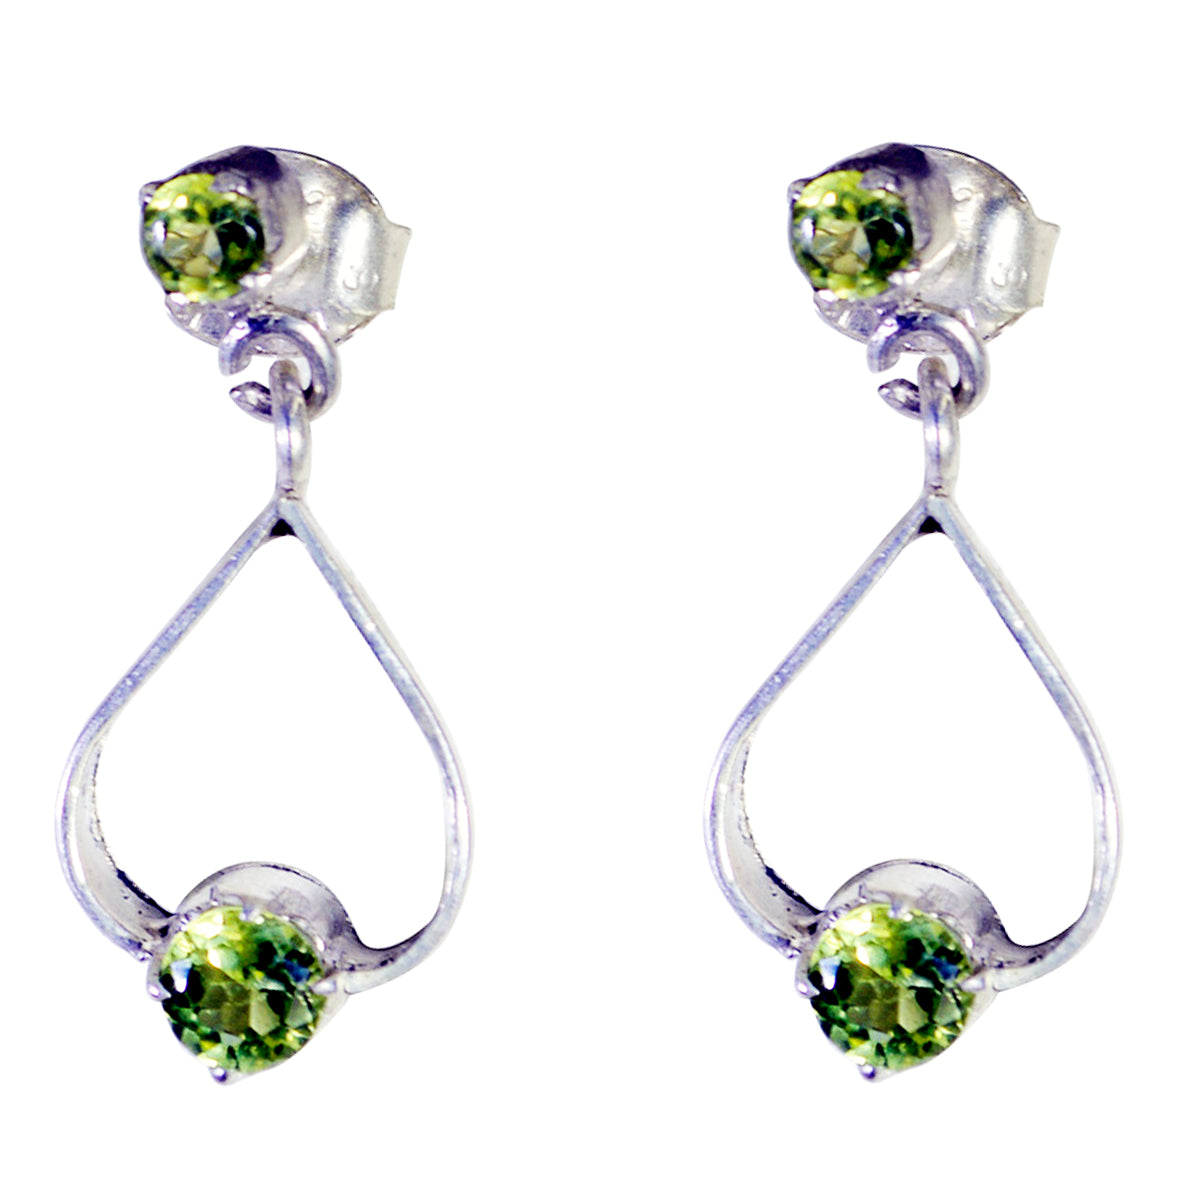 Riyo Real Gemstones round Faceted Green Peridot Silver Earrings gift for black Friday